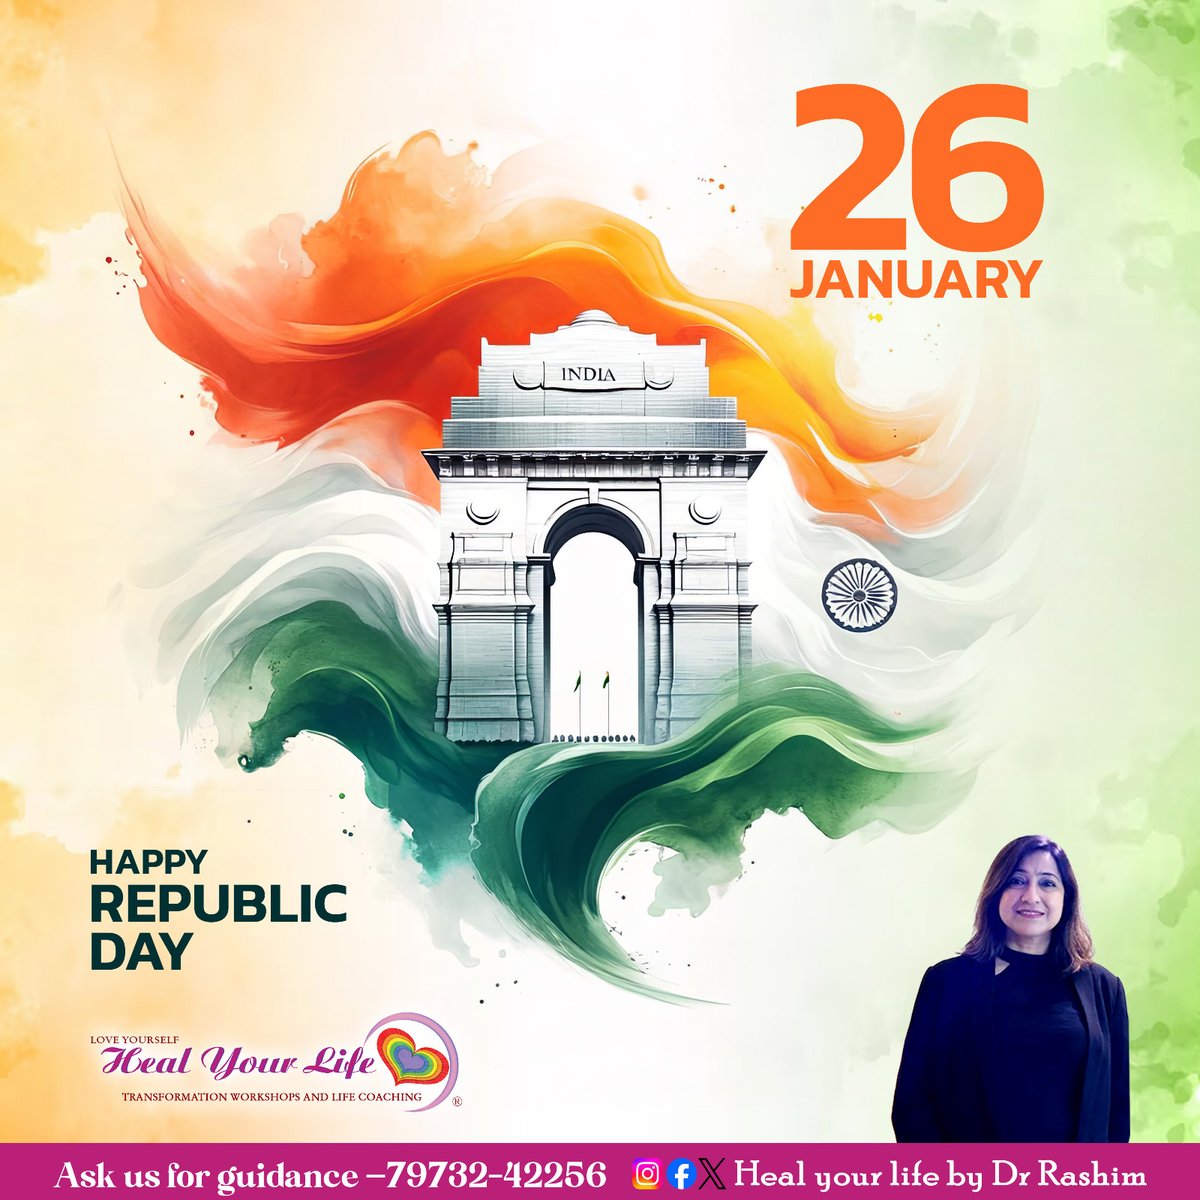 🕊️ May the principles of justice, liberty, equality, and fraternity guide our path toward a brighter future. 🌈🤲
Happy Republic Day!🇮🇳
.
.
#republicday #RepublicDay2024 #indiarepublicday #RepublicDayVibes  #FreedomFighters #IndianPride #TricolorLove #RepublicDayPledge #india